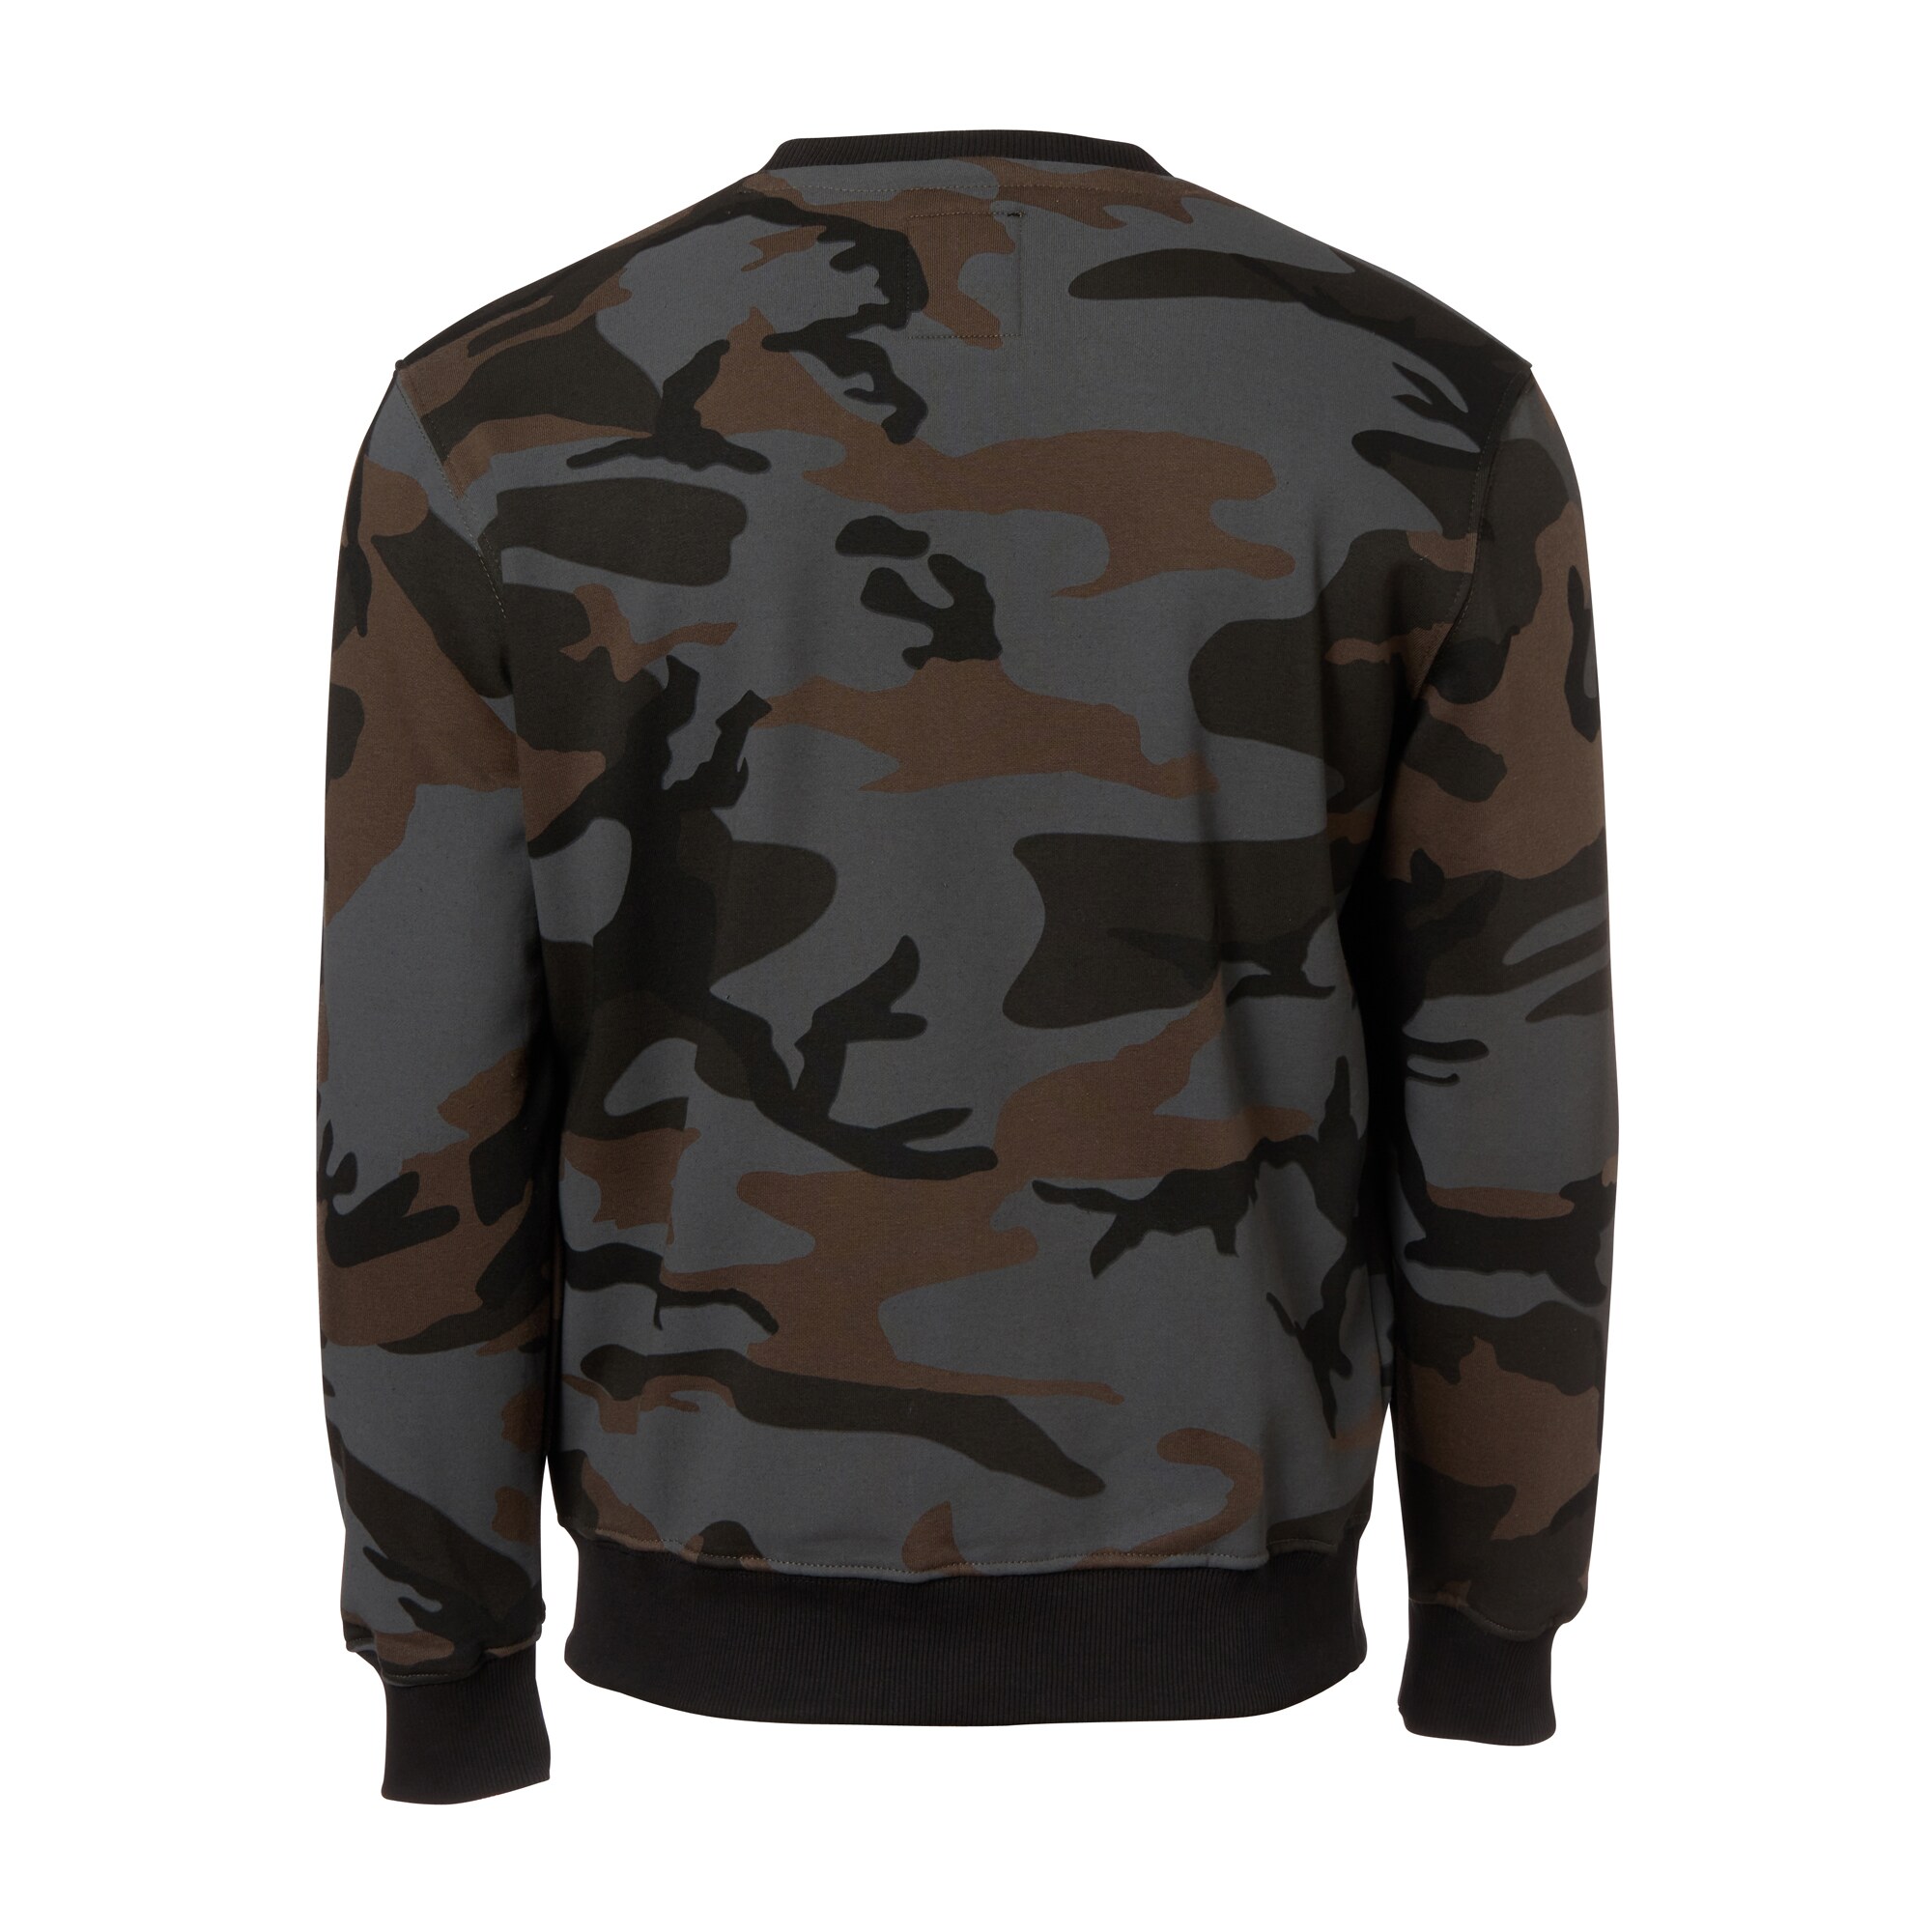 Purchase the Alpha Camo black Basic Sweater Pullover Industries